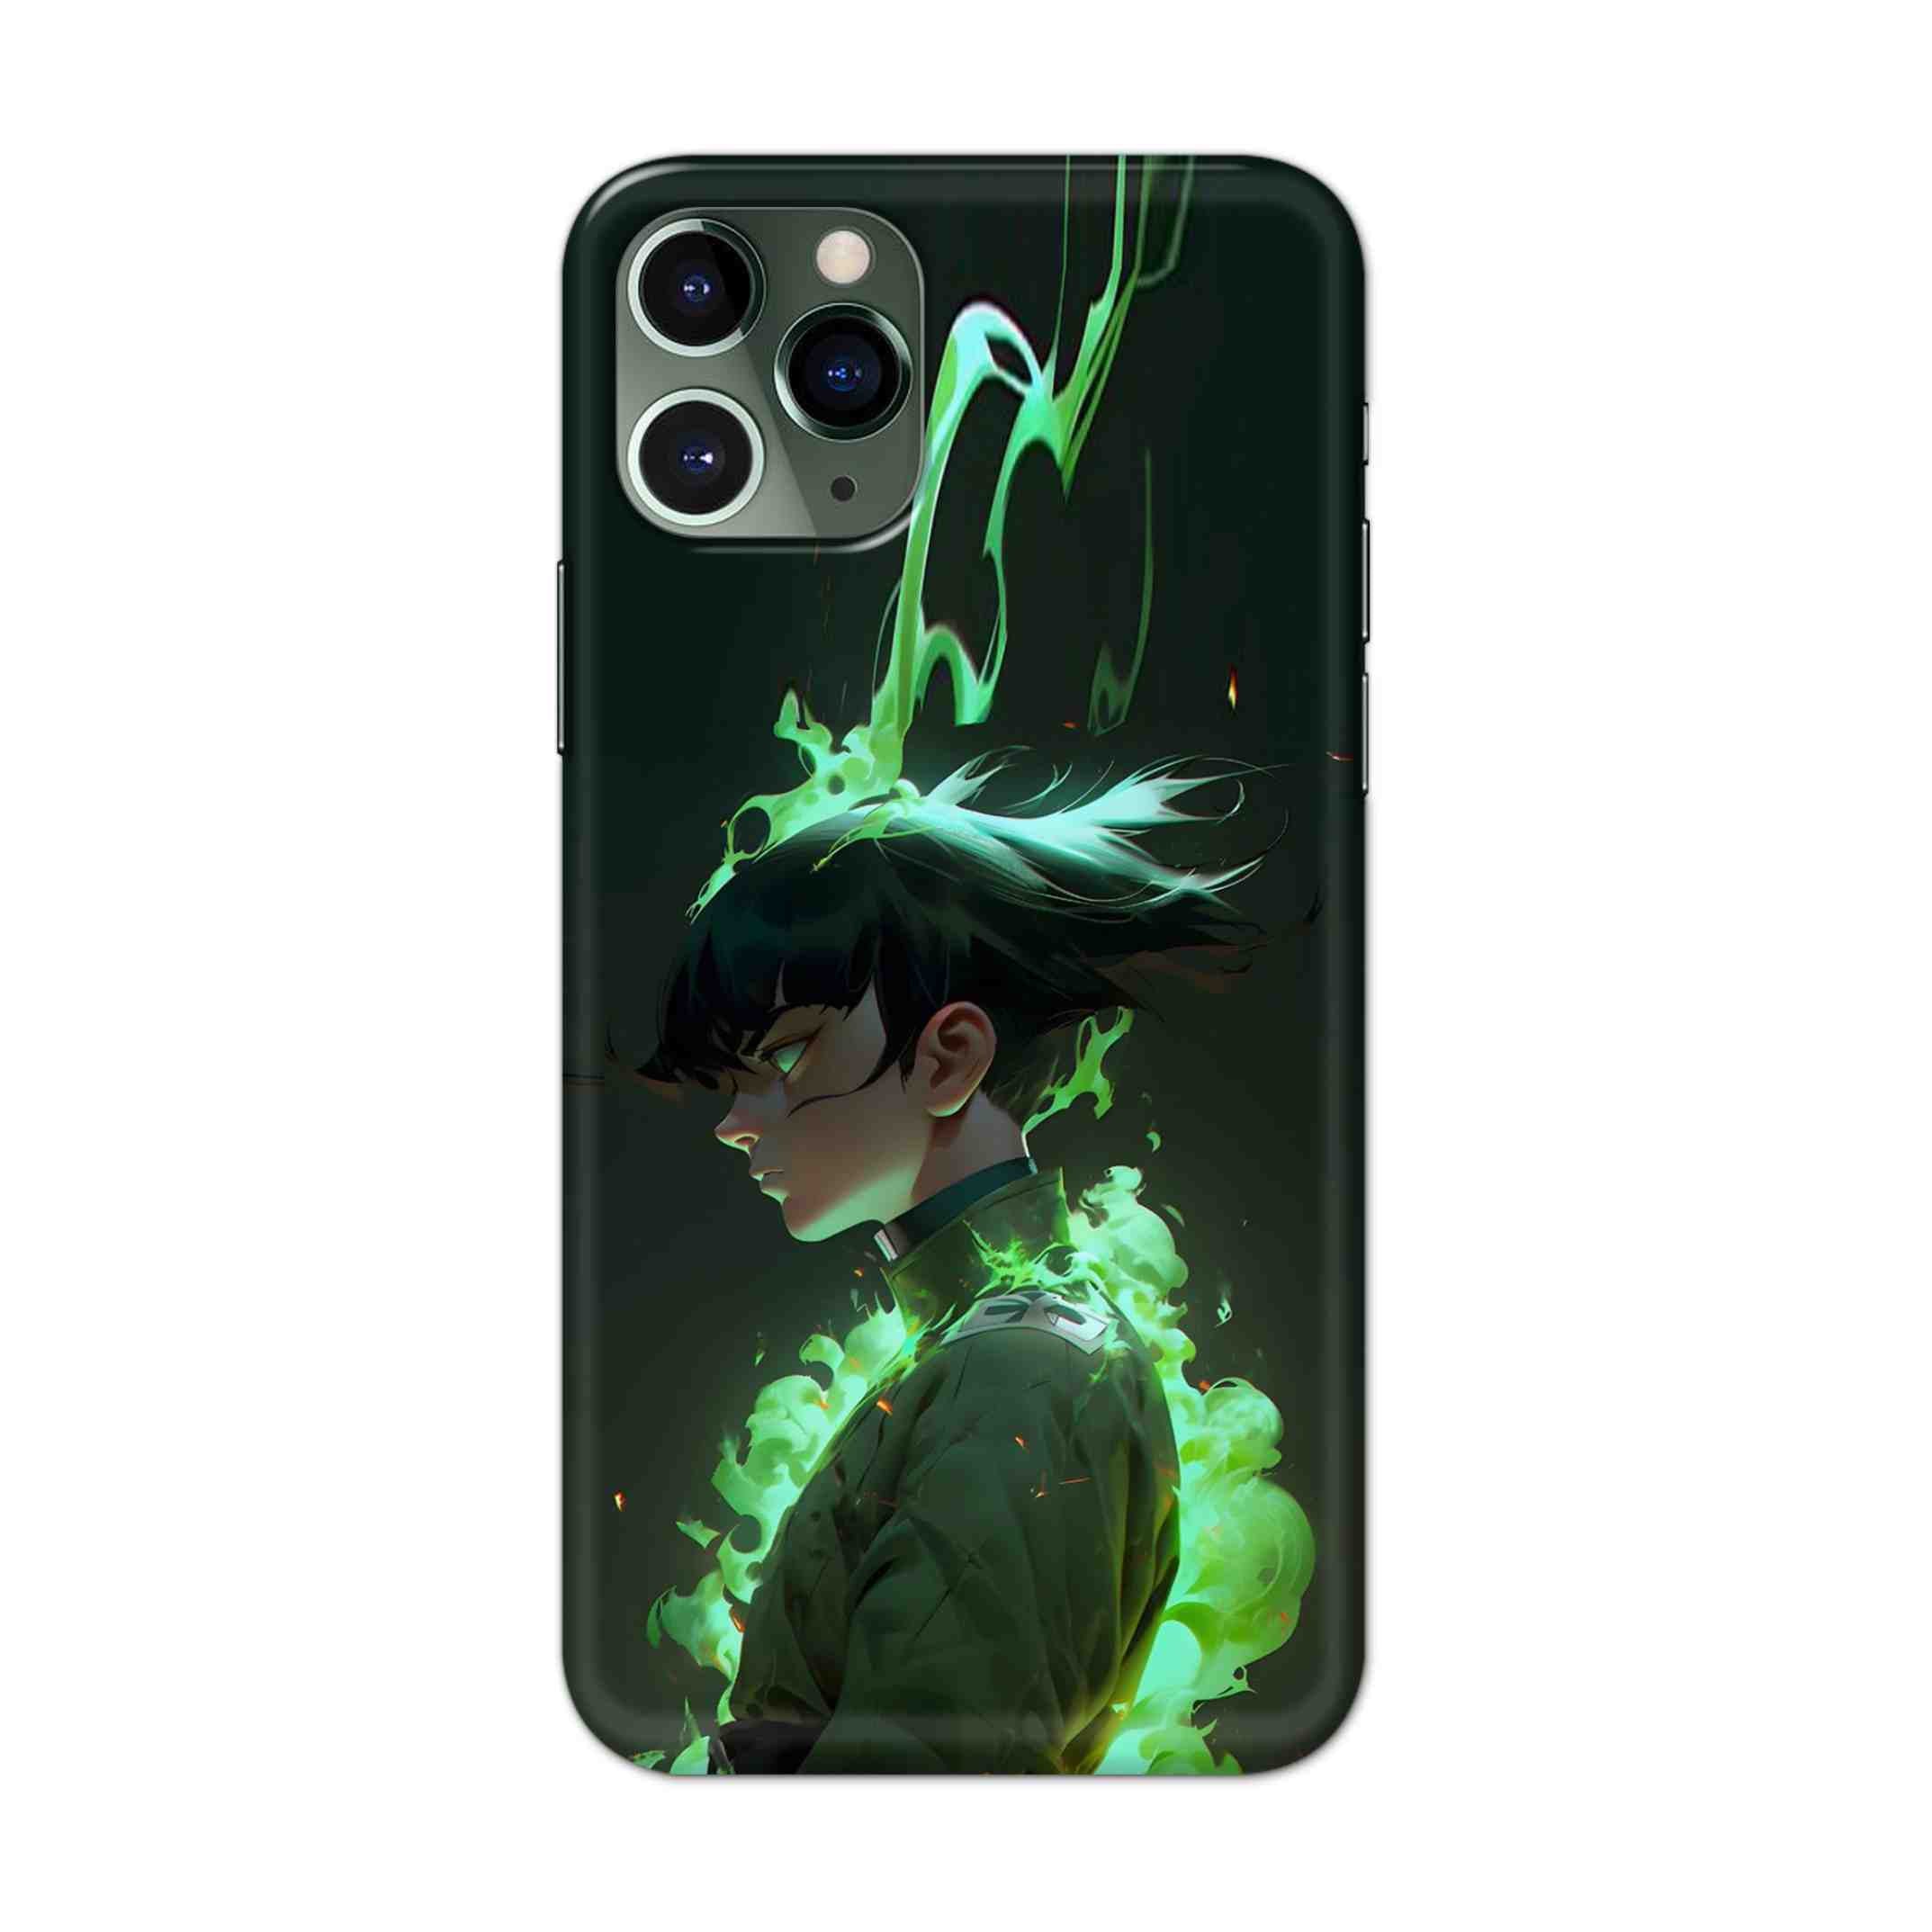 Buy Akira Hard Back Mobile Phone Case/Cover For iPhone 11 Pro Online